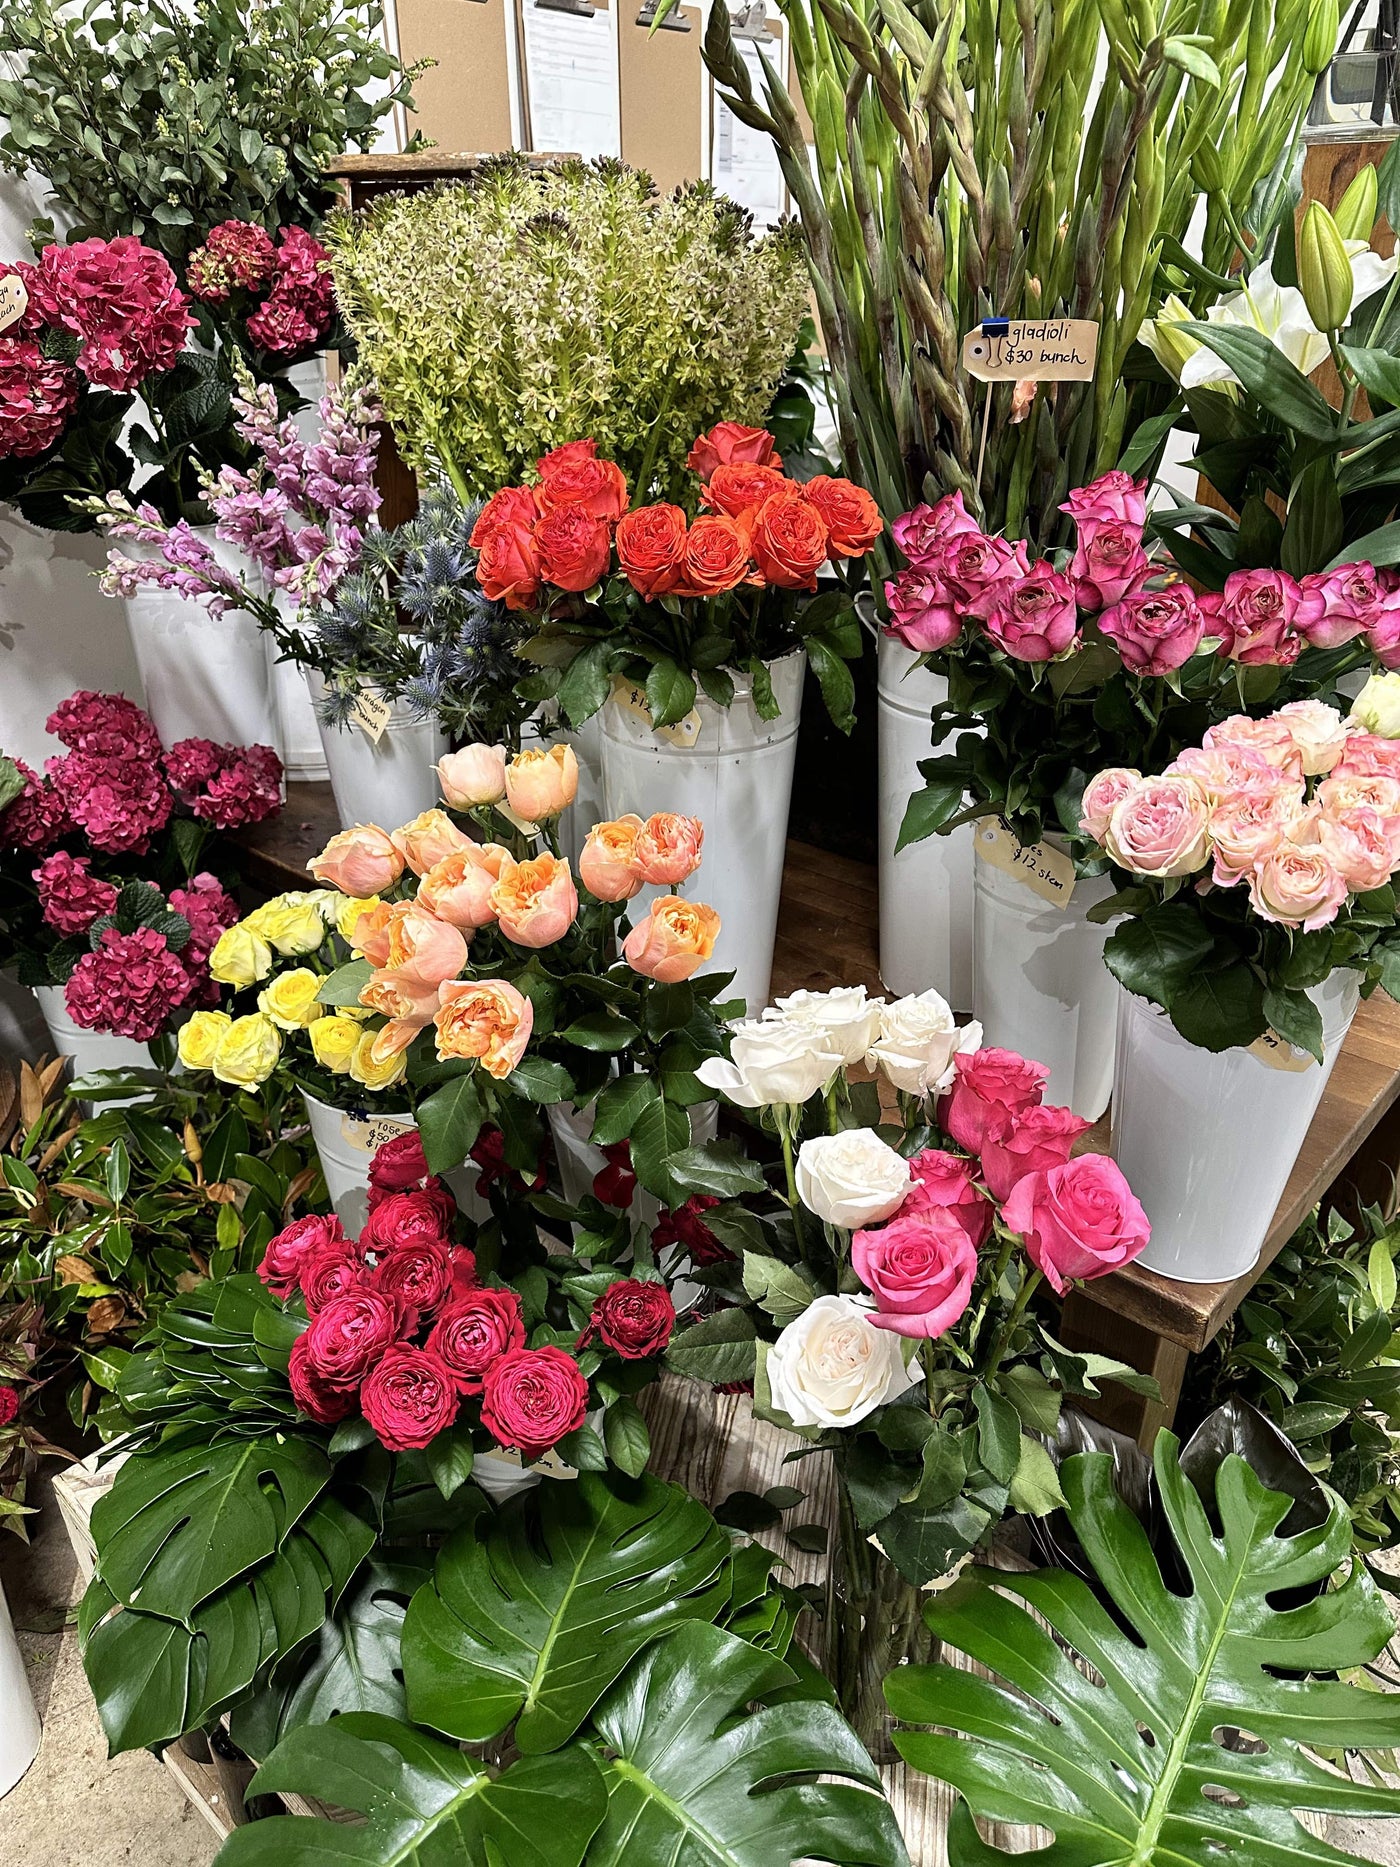 What Flowers Are Available in February?